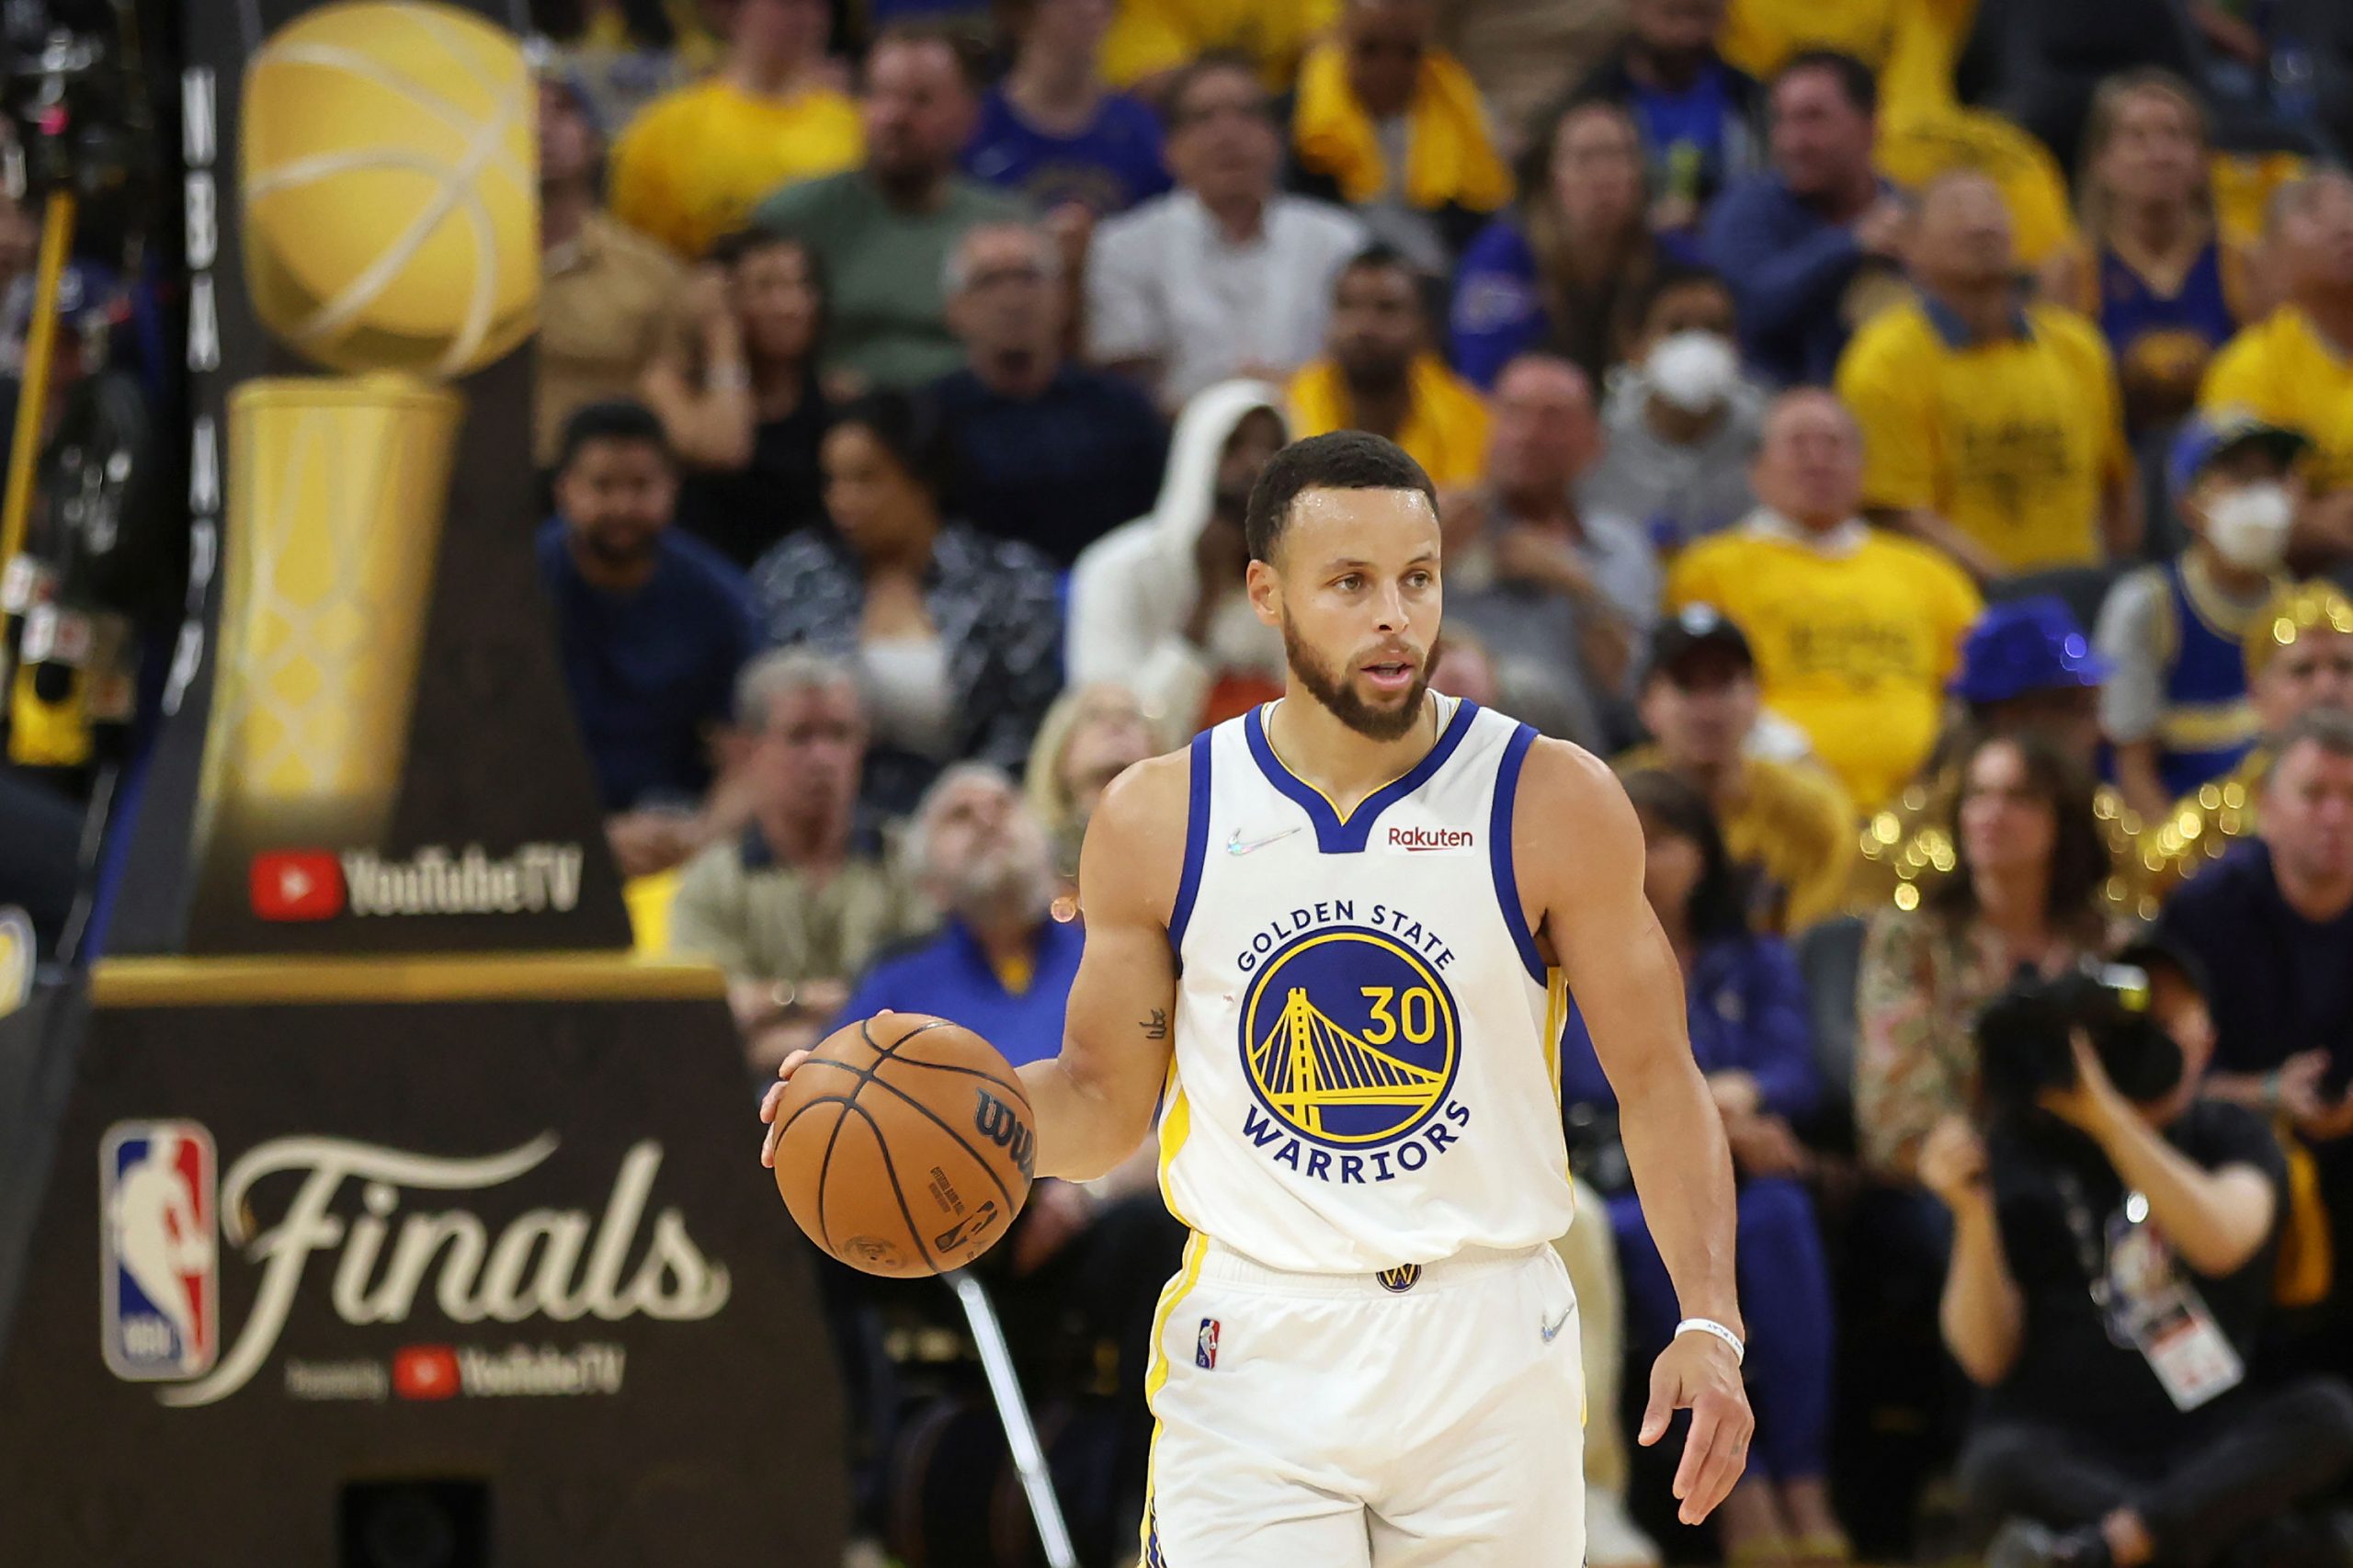 NBA Finals: Stephen Curry resets 3-pointer streak with flawless shot